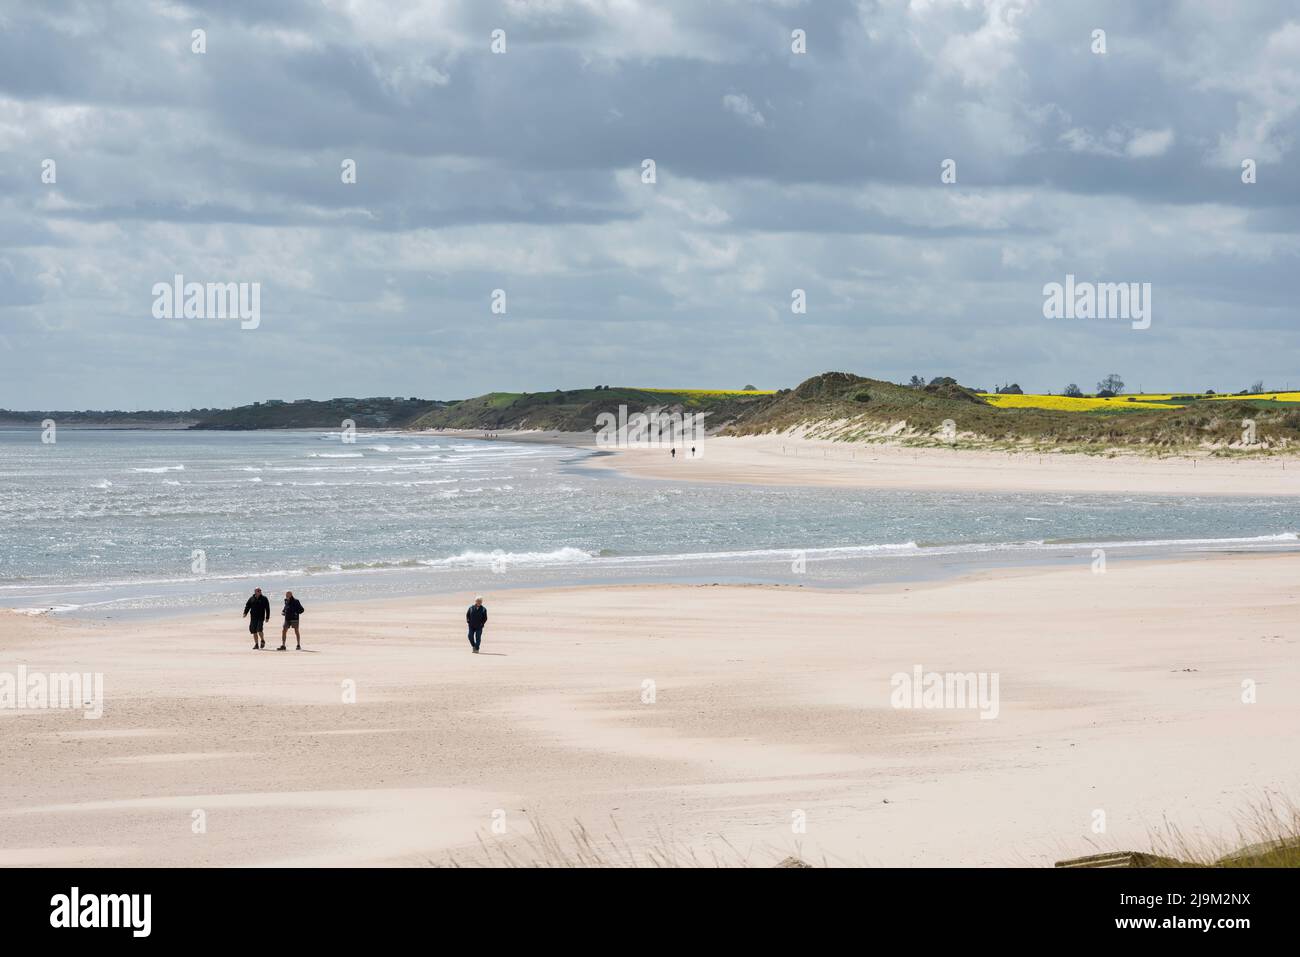 Northumberland beach, view in late spring of people walking on the sandy beach in Alnmouth Bay on the Northumberland coast, Alnmouth, England, UK Stock Photo